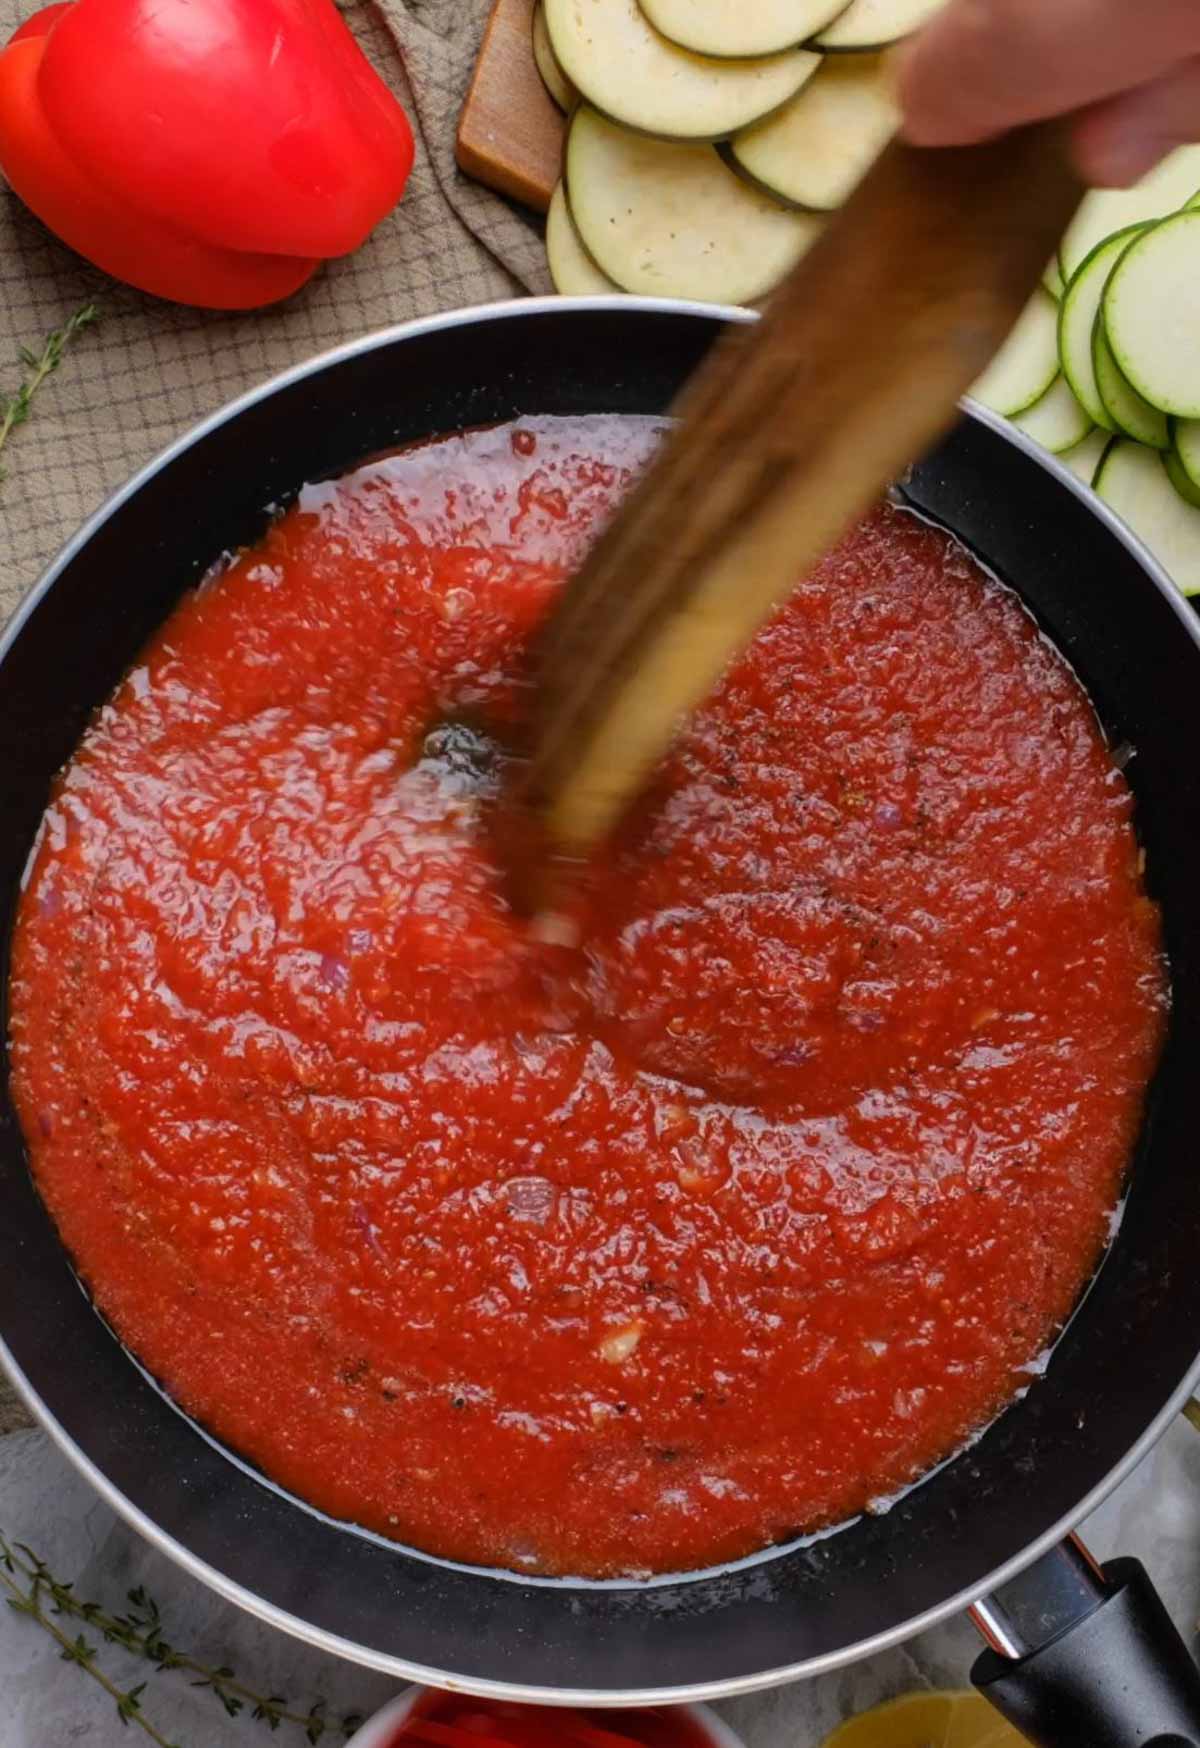 Tomato sauce being simmered in a sauté pan.